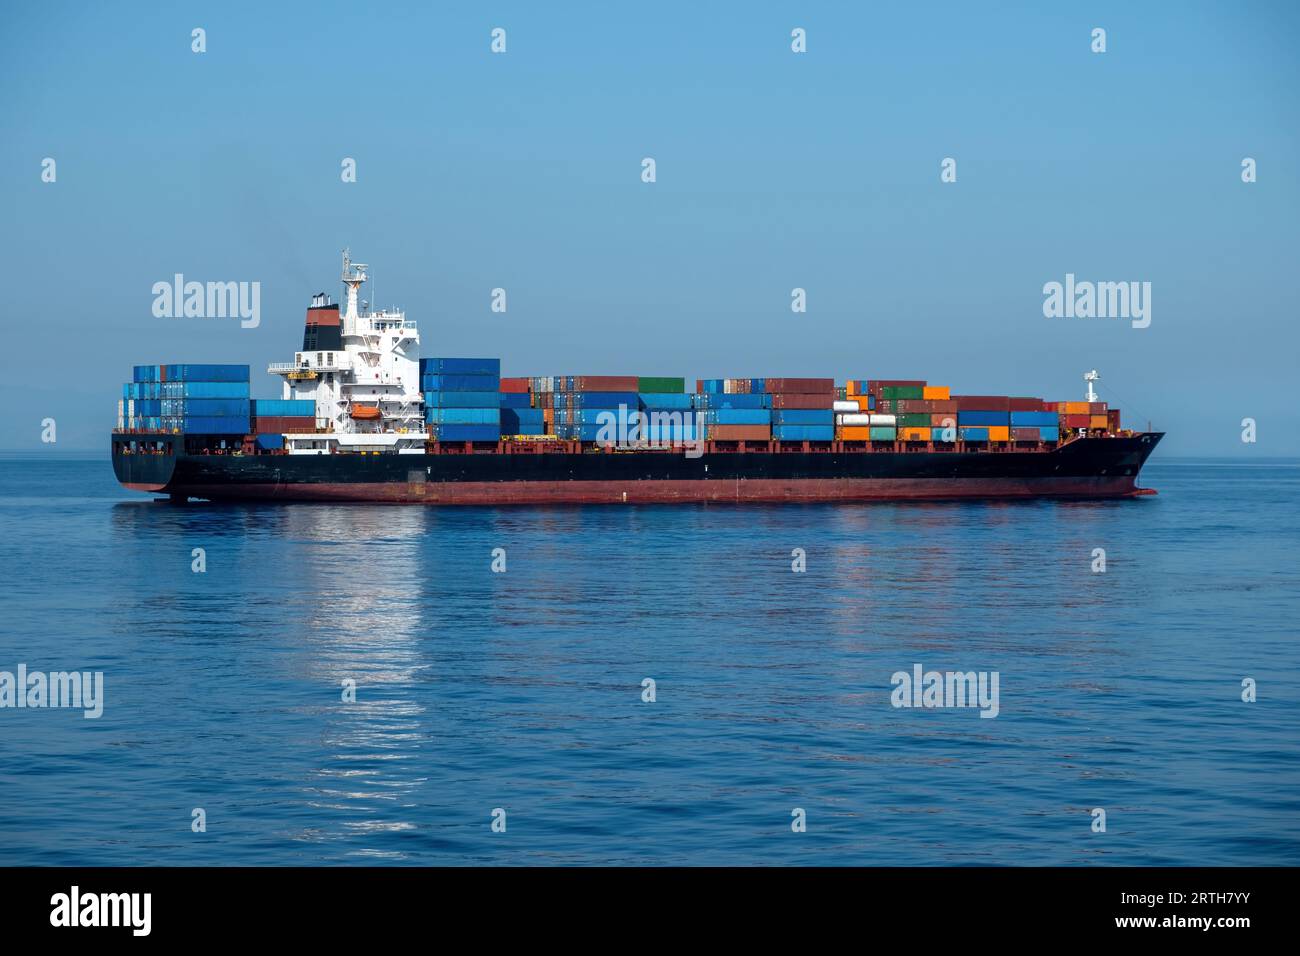 Container cargo ship loaded moored in open Mediterranean sea, Piraeus port Greece. Storage and carry of heavy merchandise for import, export. Stock Photo